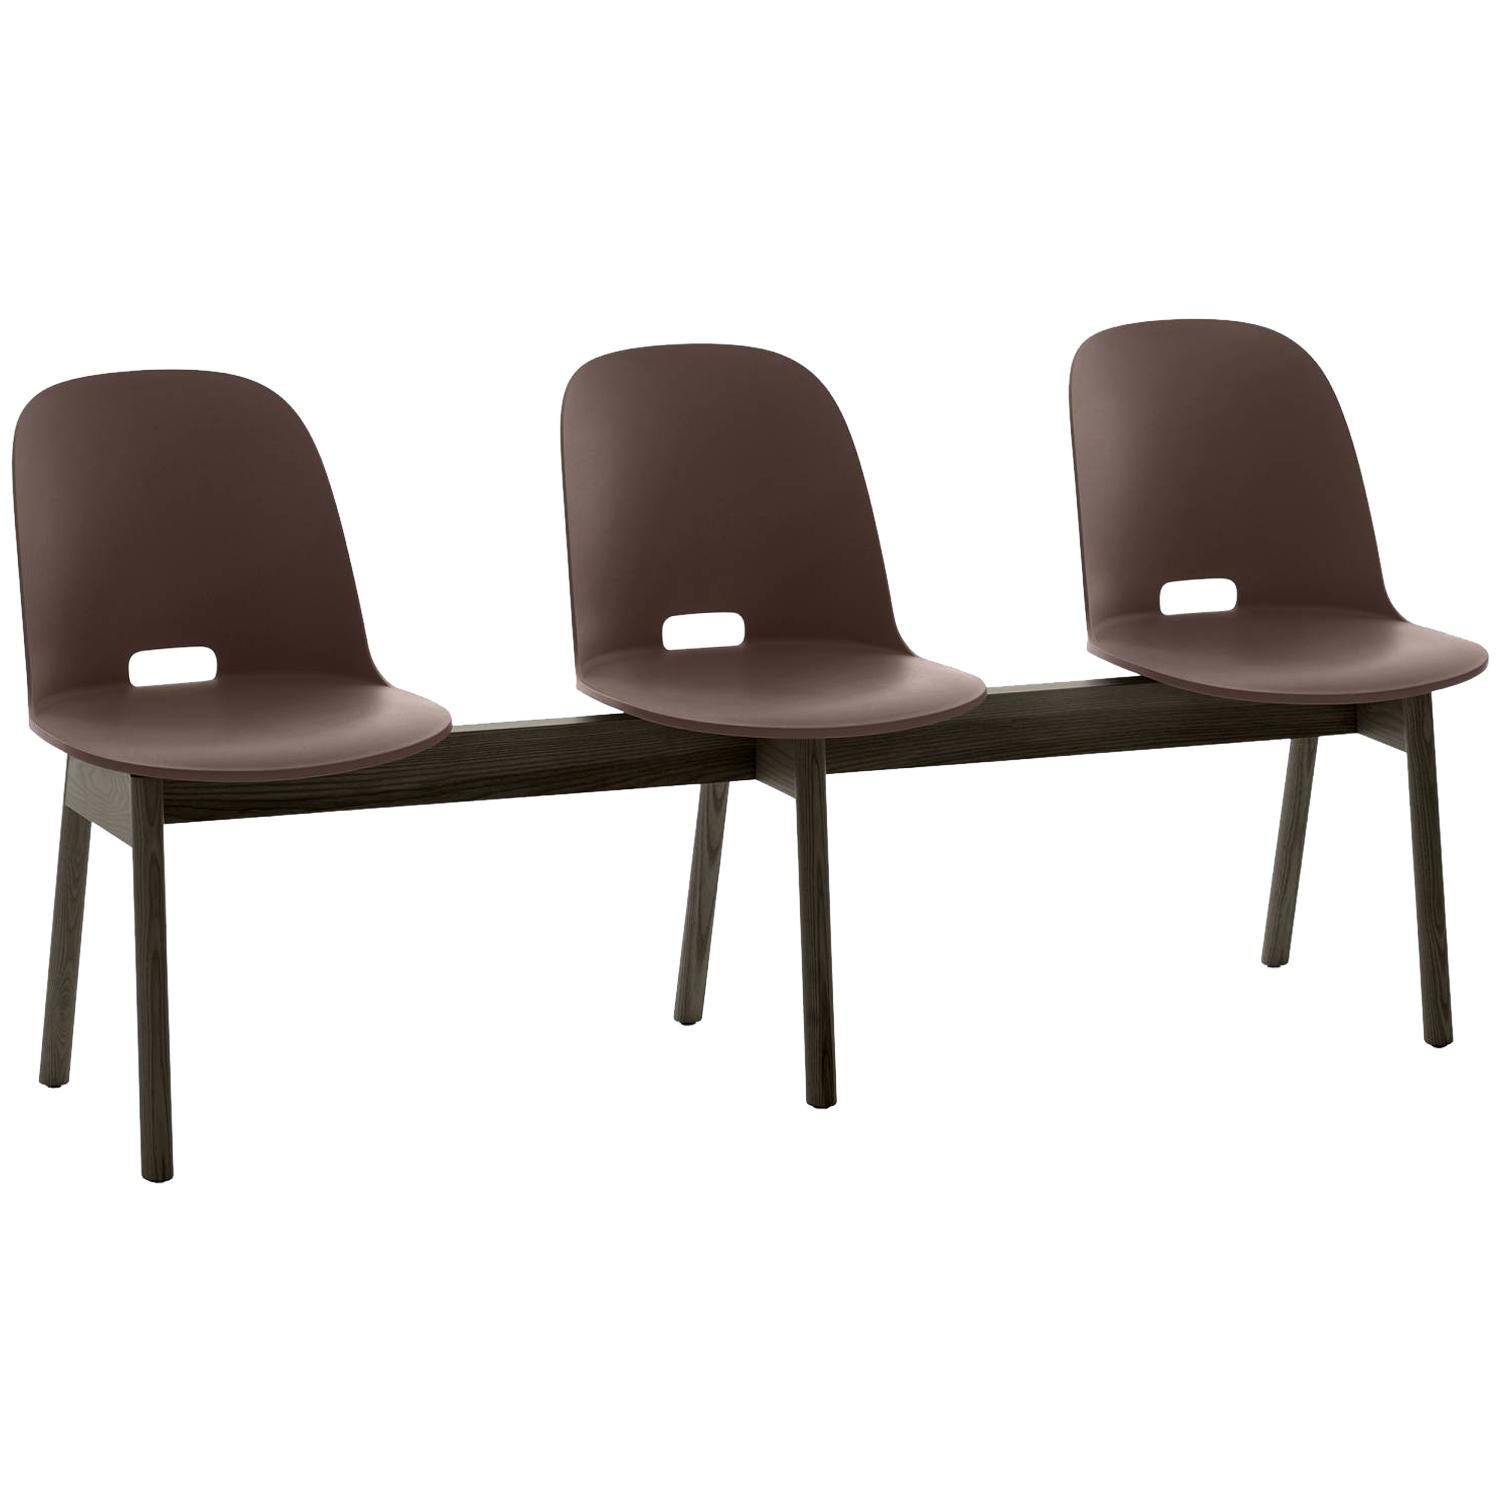 Emeco Alfi 3-Seat Bench in Brown & Dark Ash with High Back by Jasper Morrison For Sale